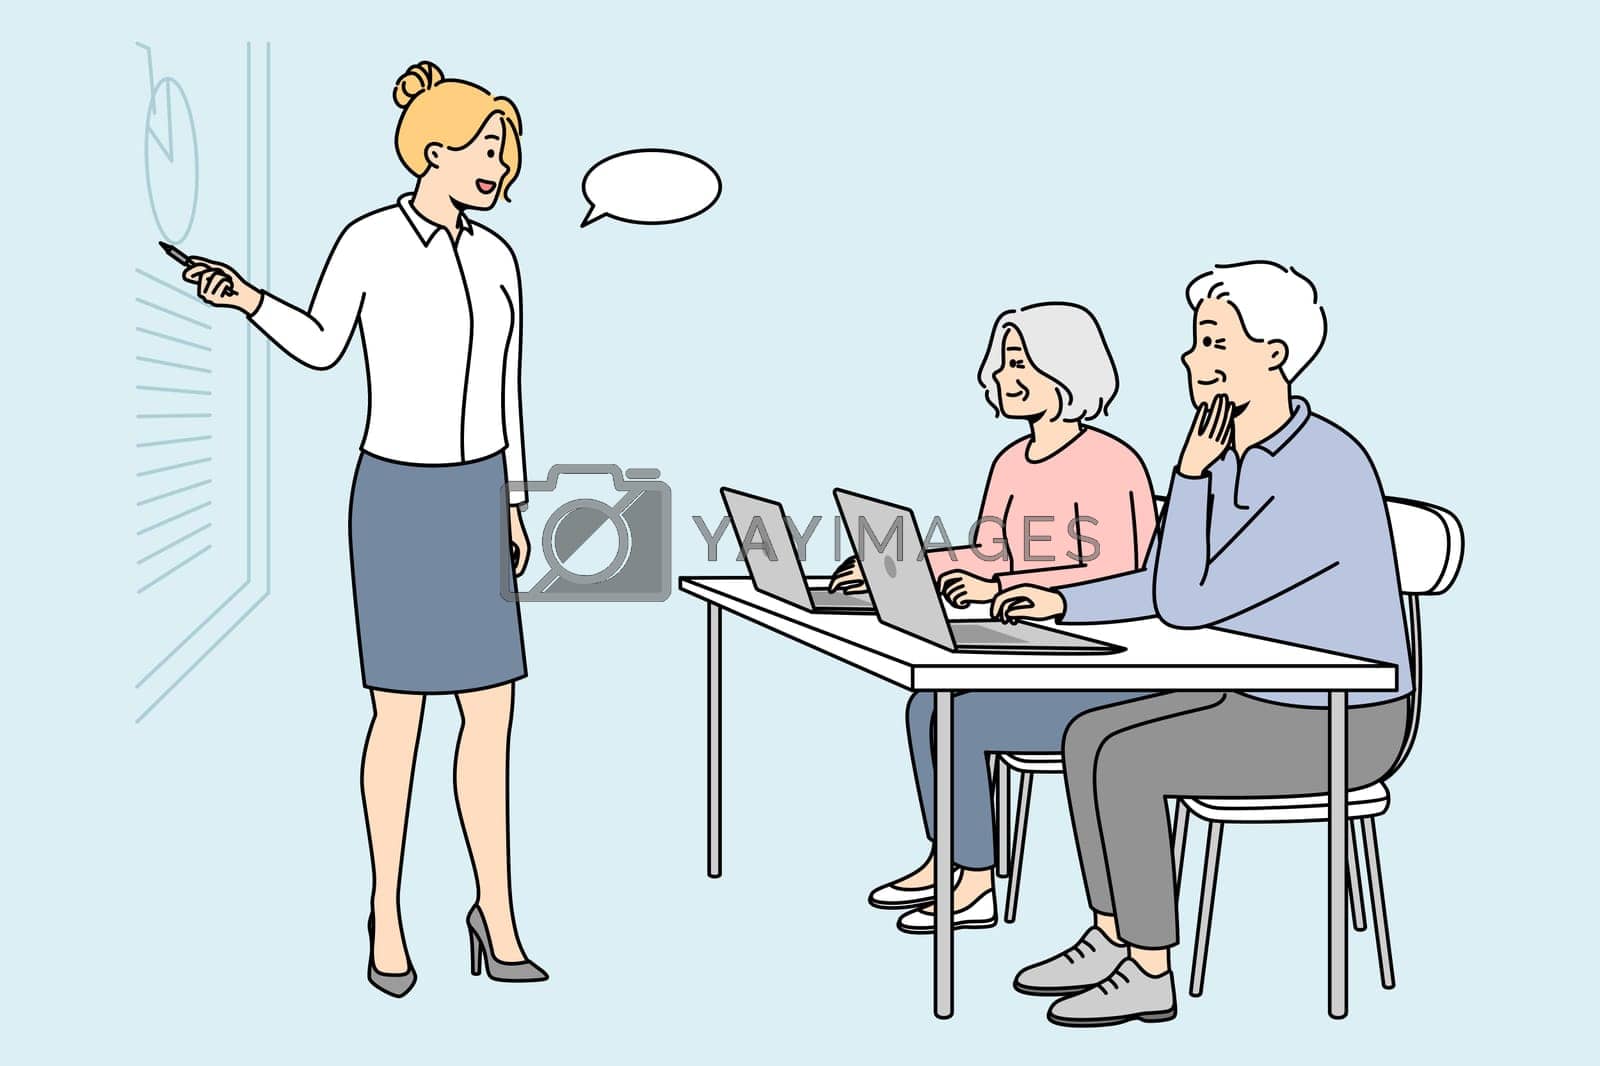 Royalty free image of Retraining, additional education for elderly people. by VECTORIUM